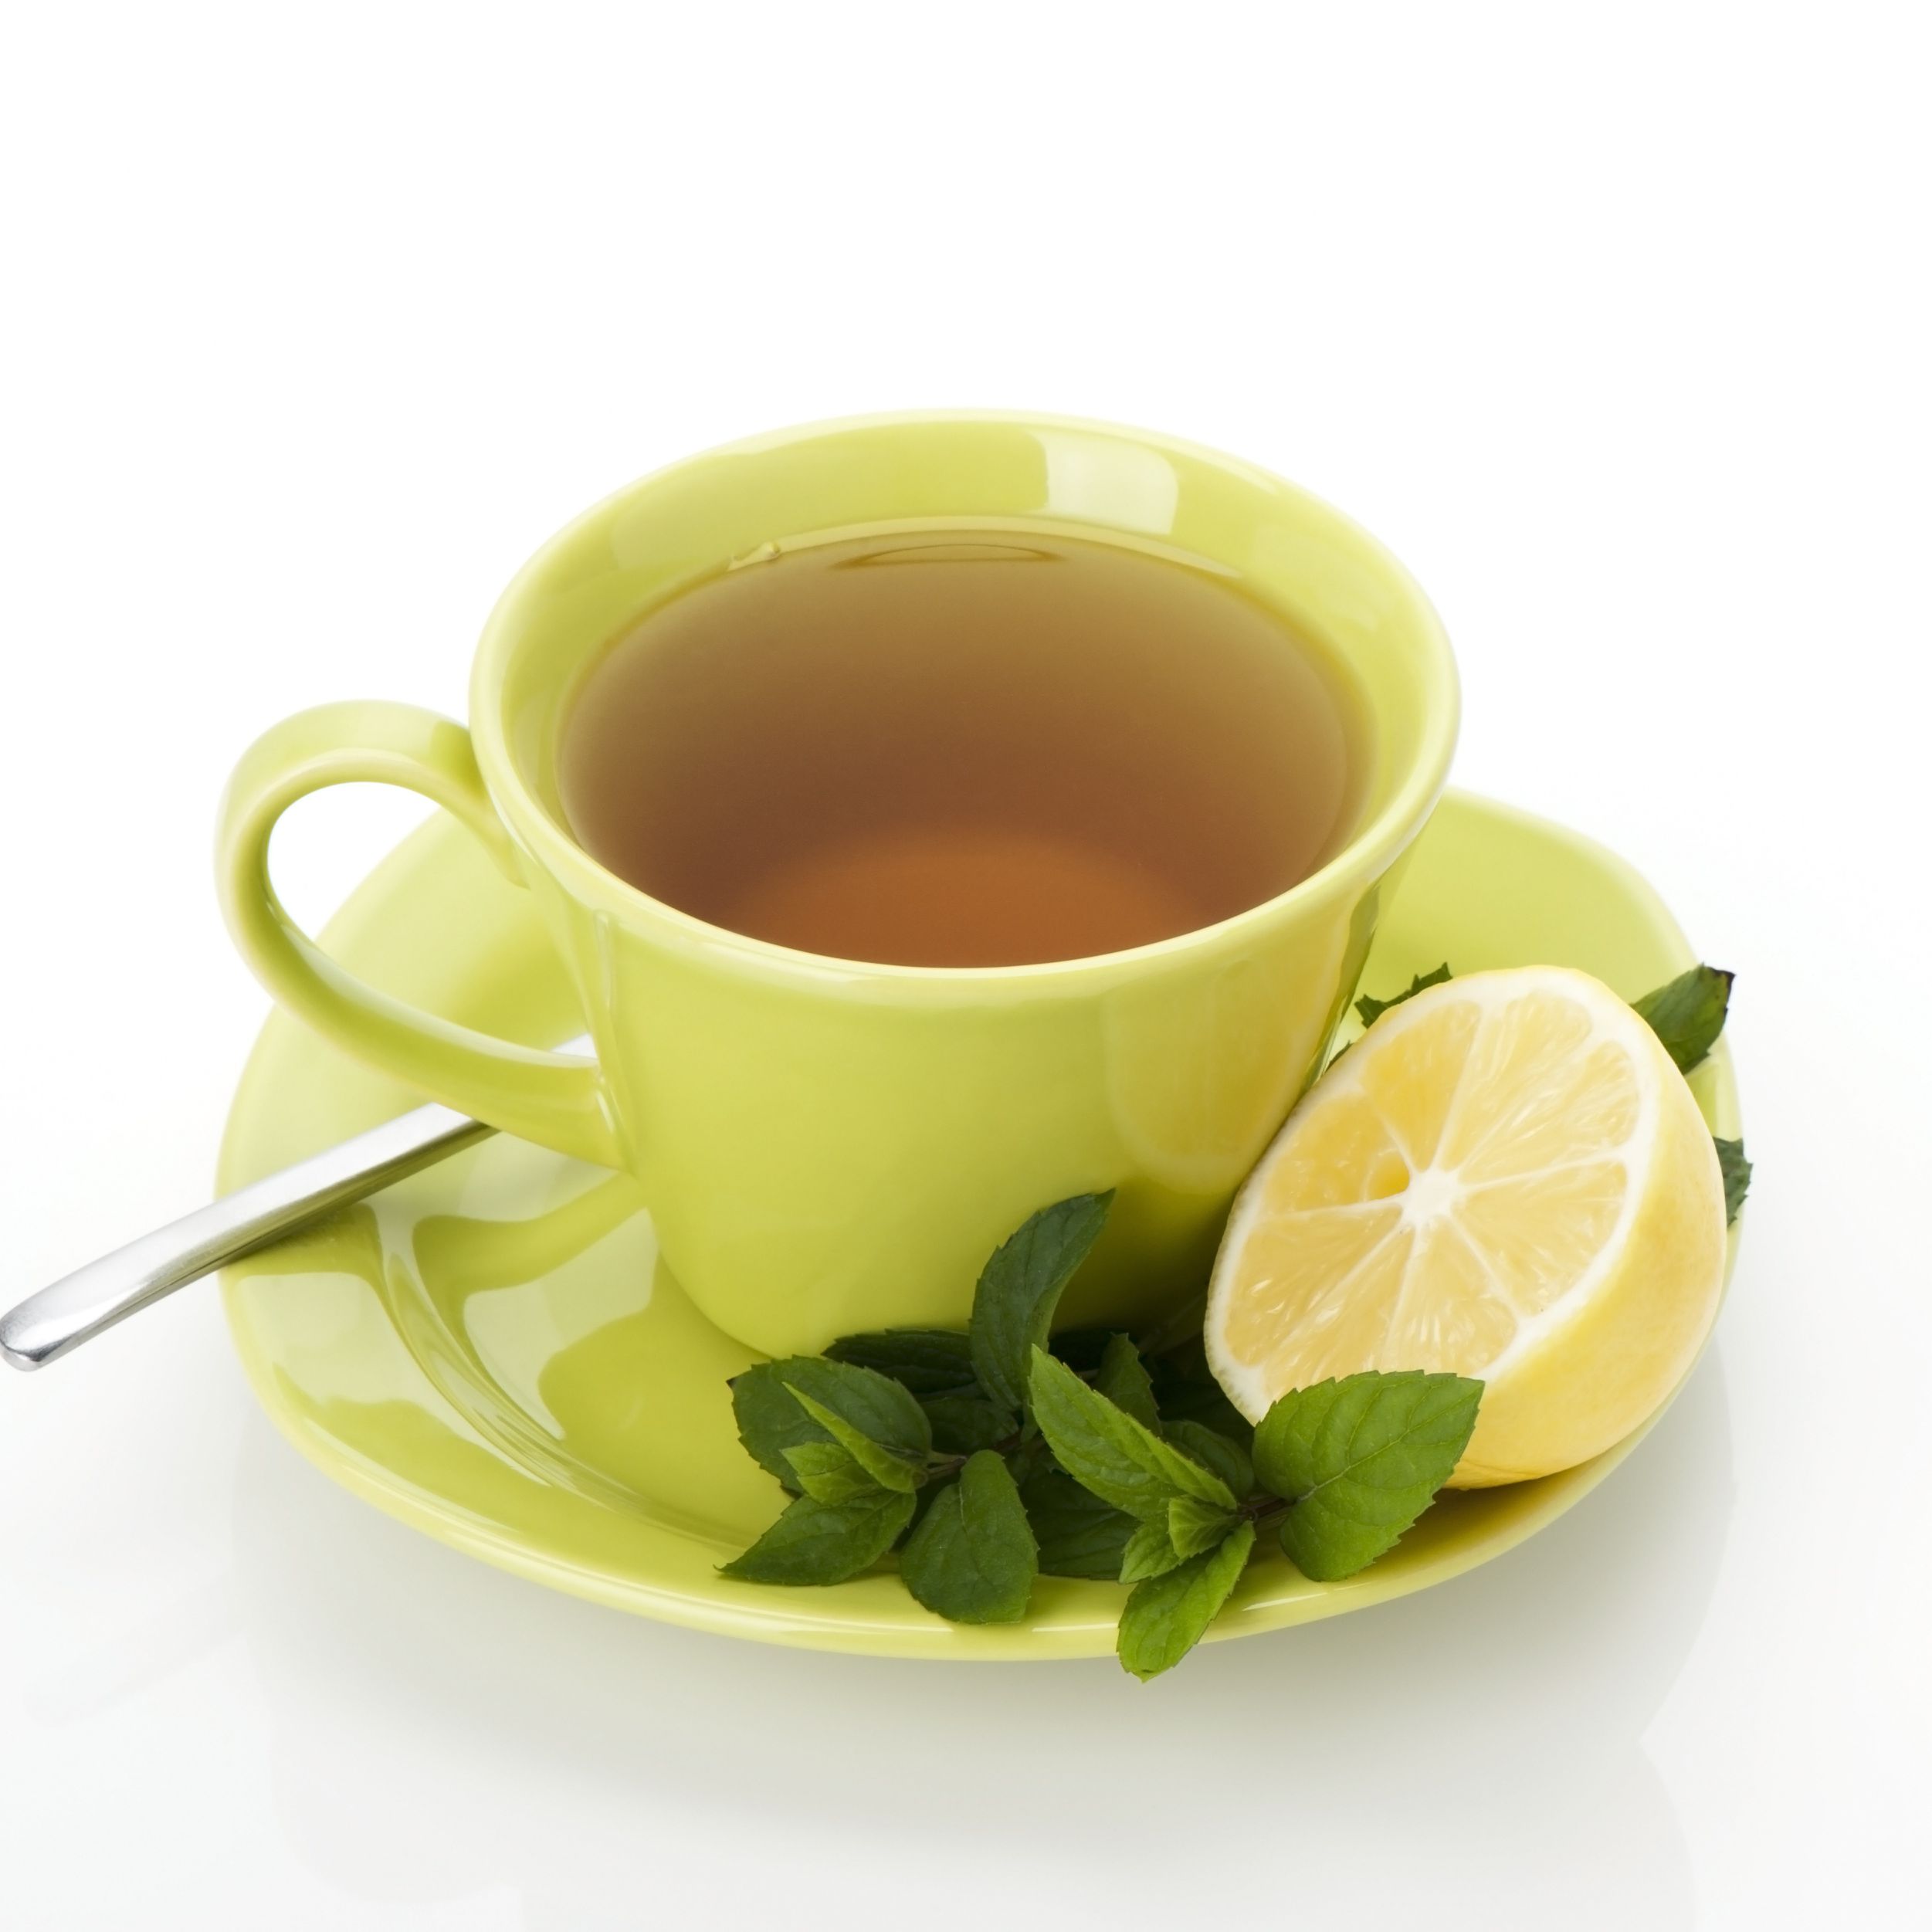 Citric acid found in certain types of green tea